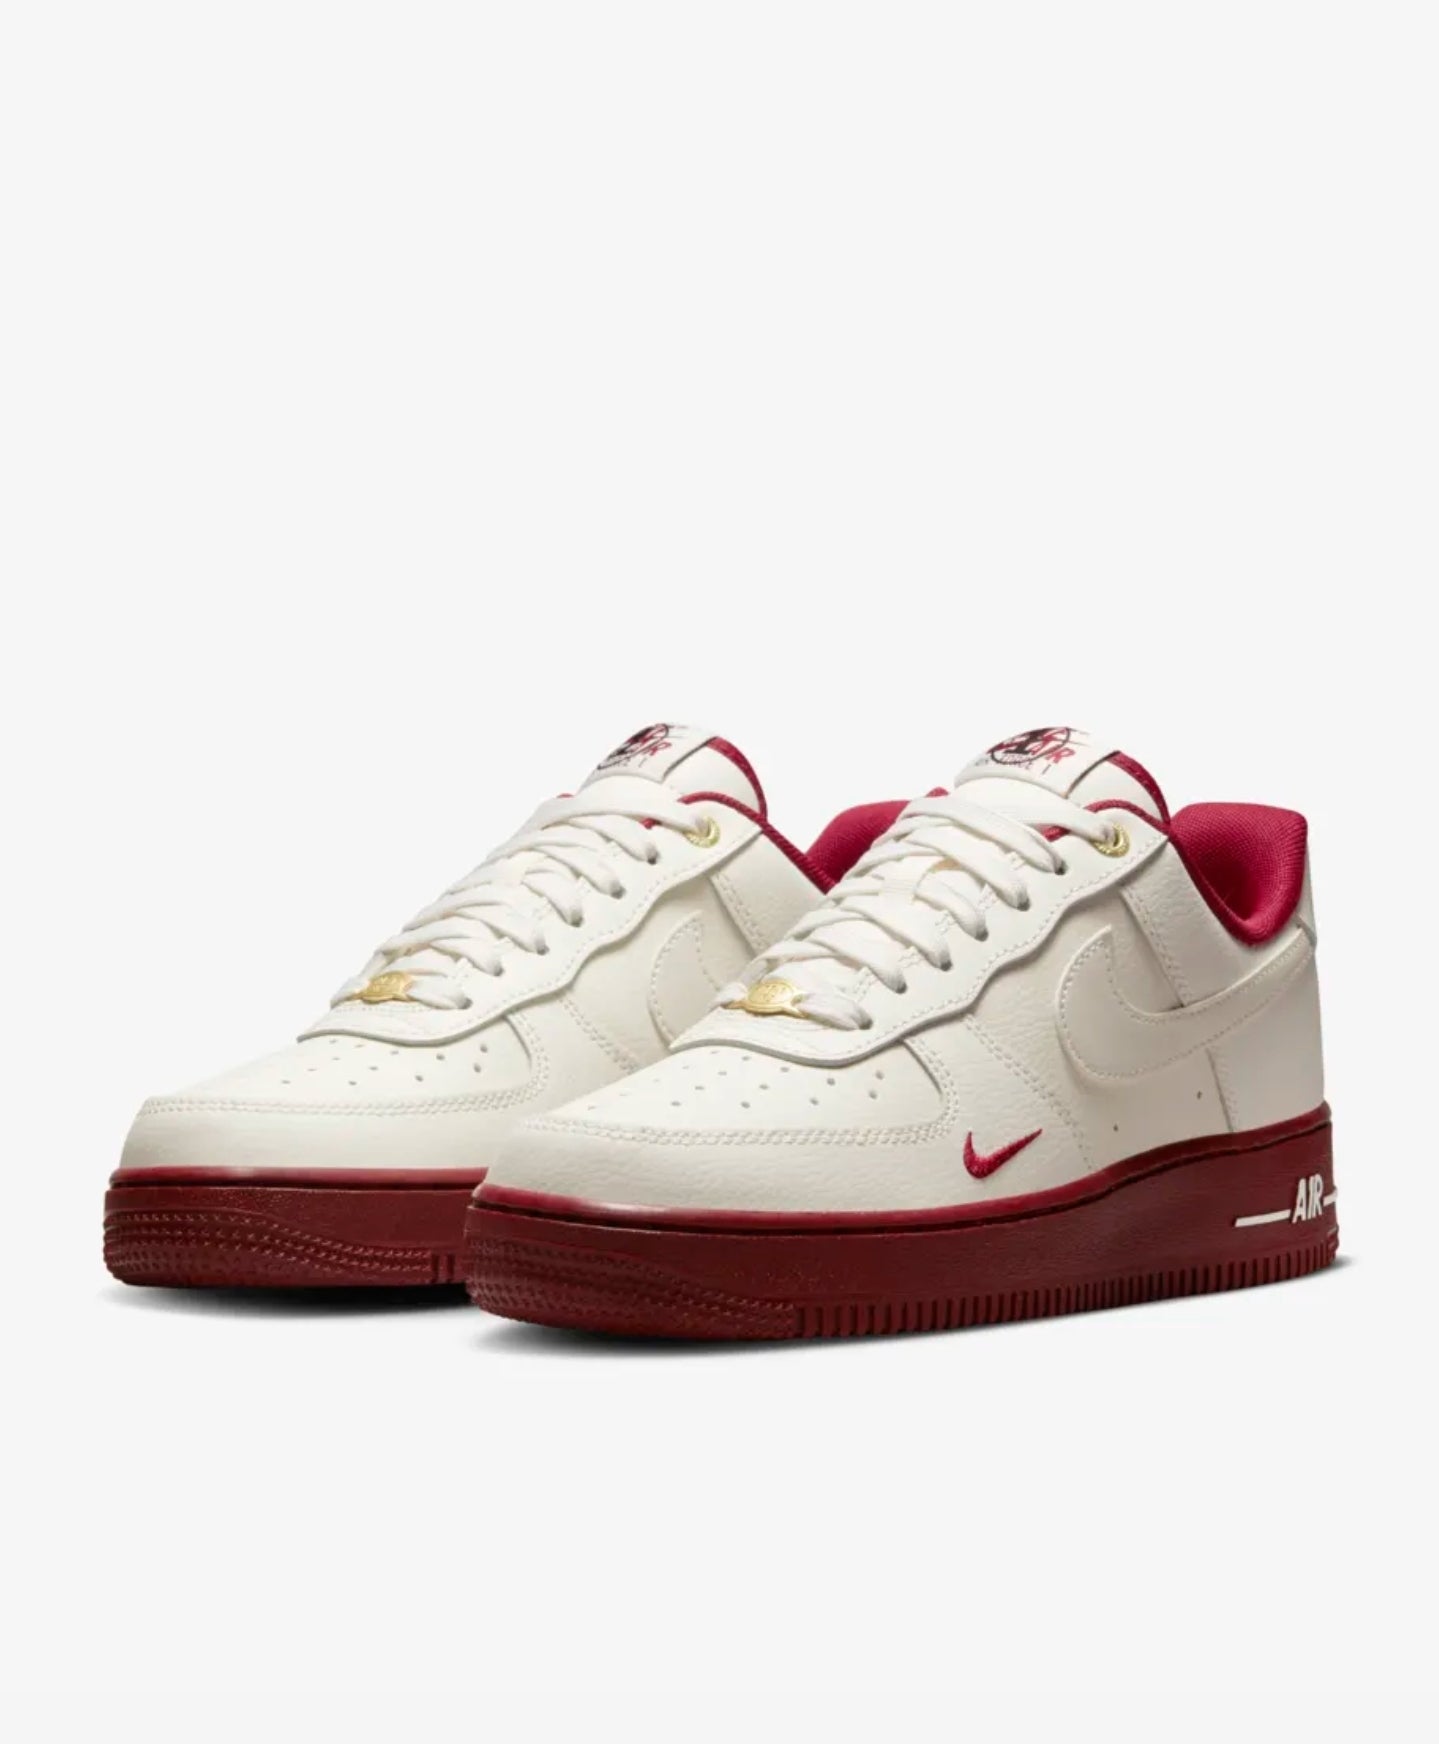 Air Force 1 '07 40th

"Join Forces"